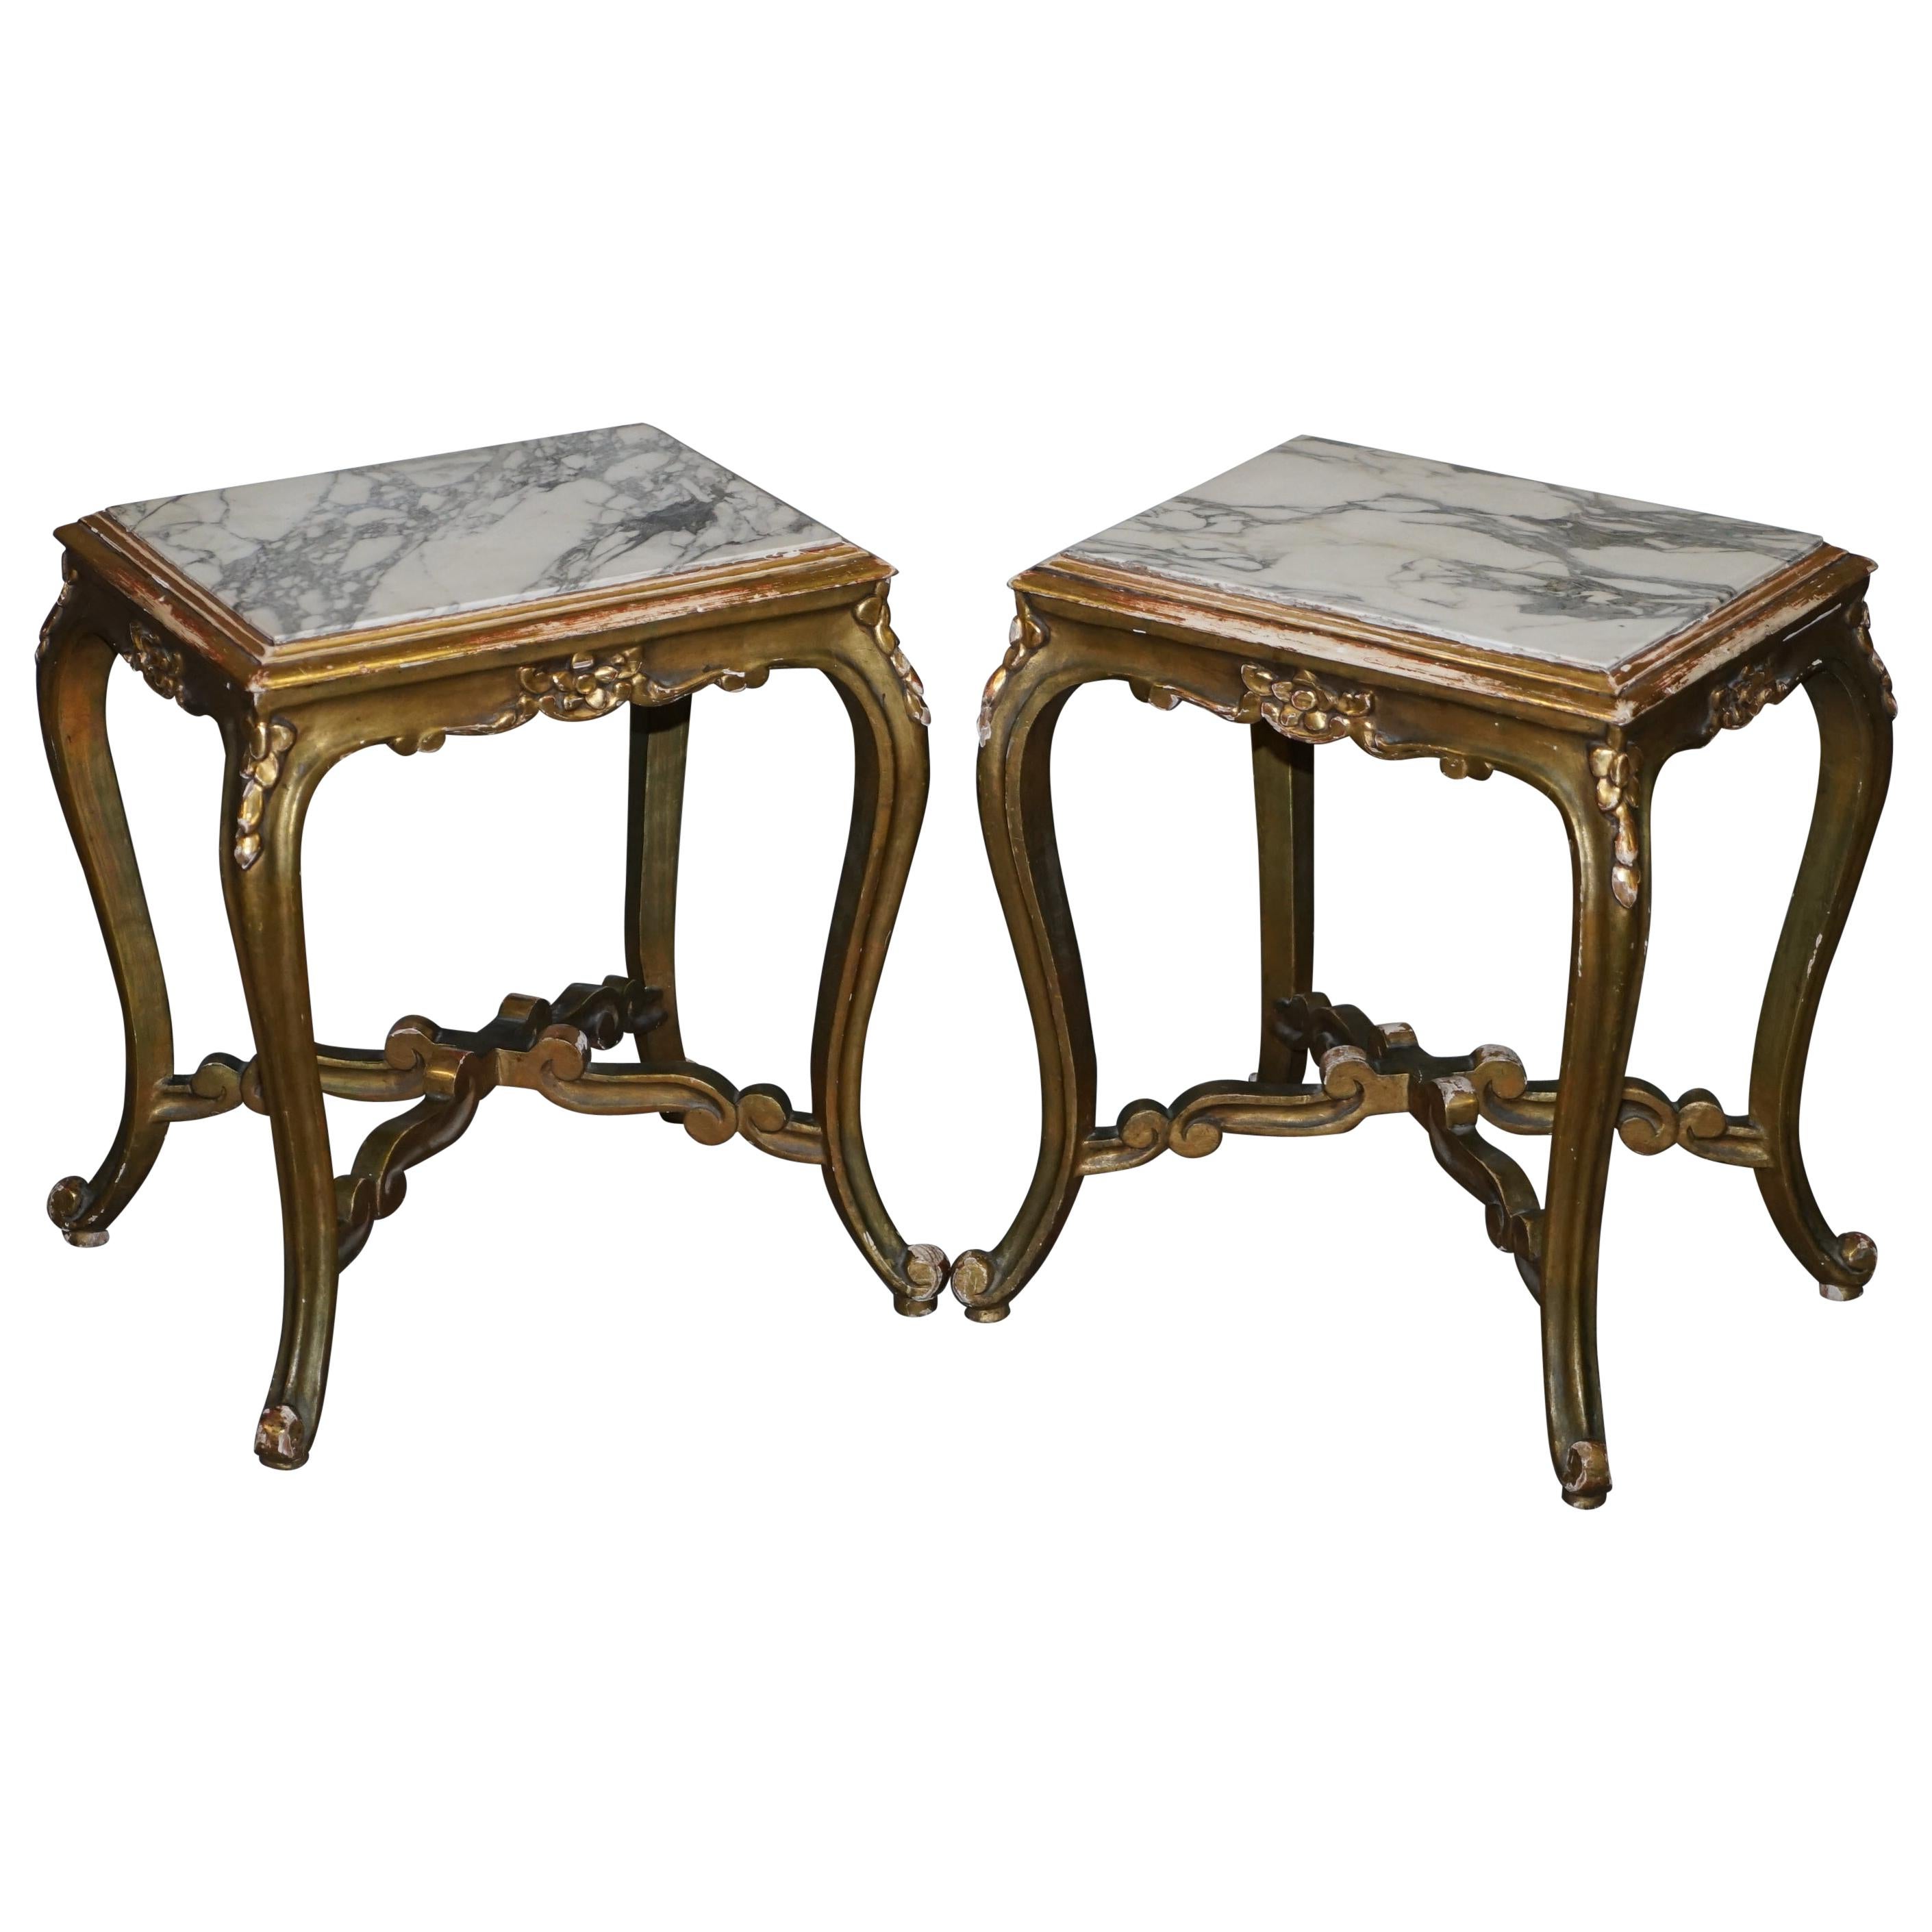 Pair of French circa 1860 Napoleon III Gold Giltwood Marble Topped Side Tables For Sale